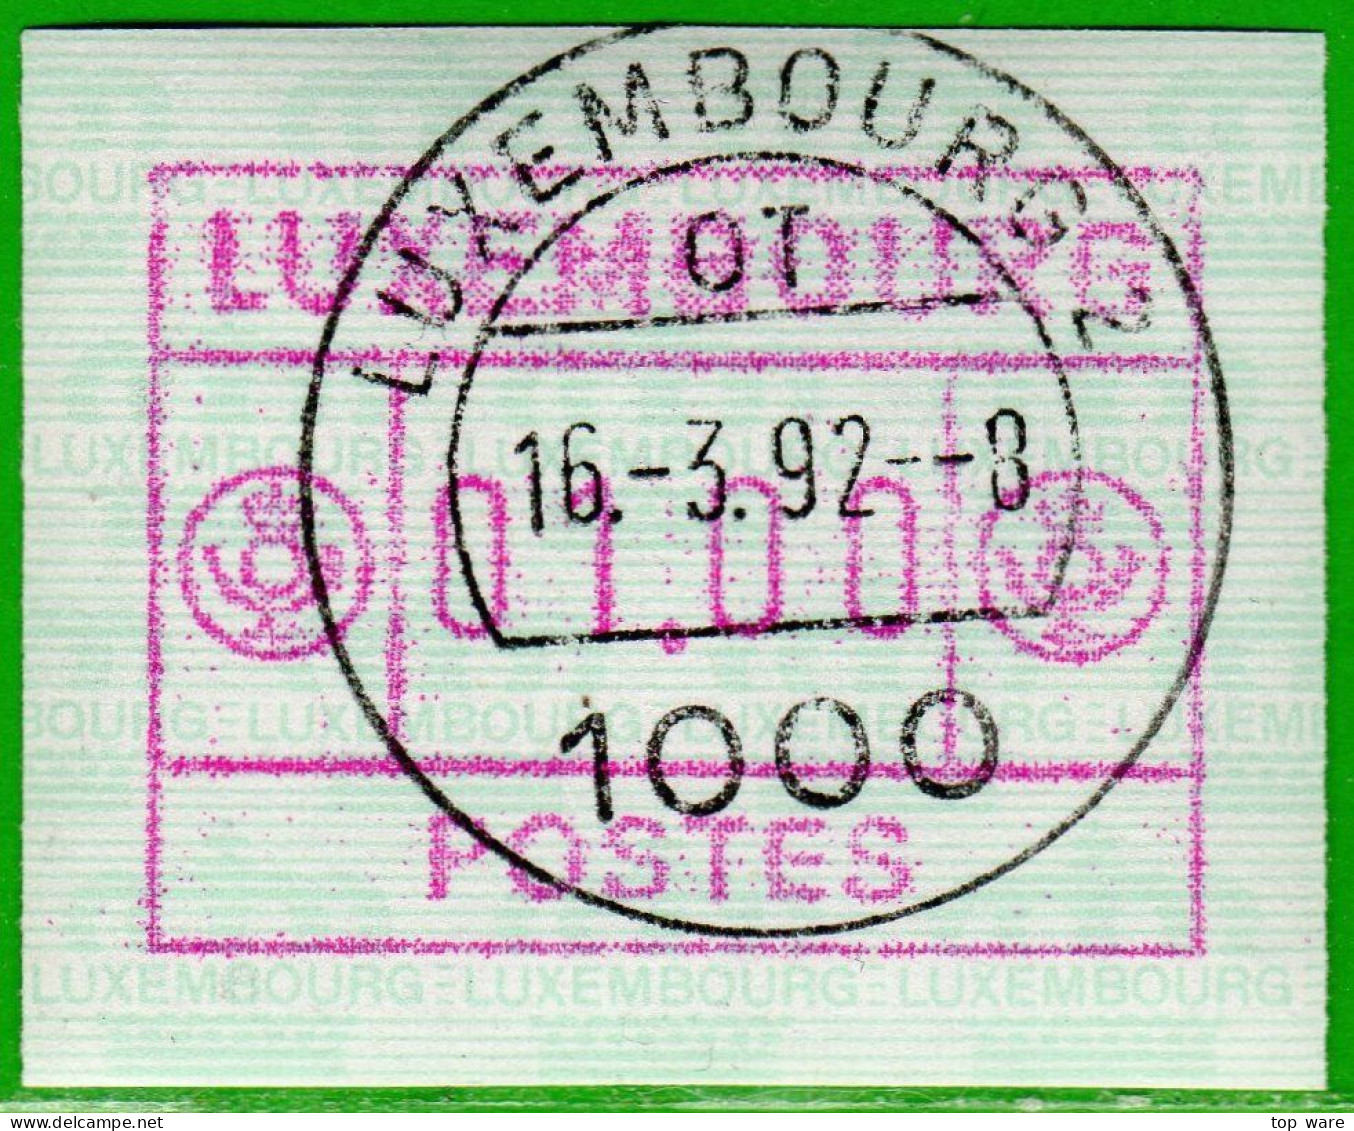 Luxemburg Luxembourg Timbres ATM 2 D Kleines Postes Rotlila / 01.00 Ersttag Tages-O 16.3.1992 / Frama Automatenmarken - Postage Labels